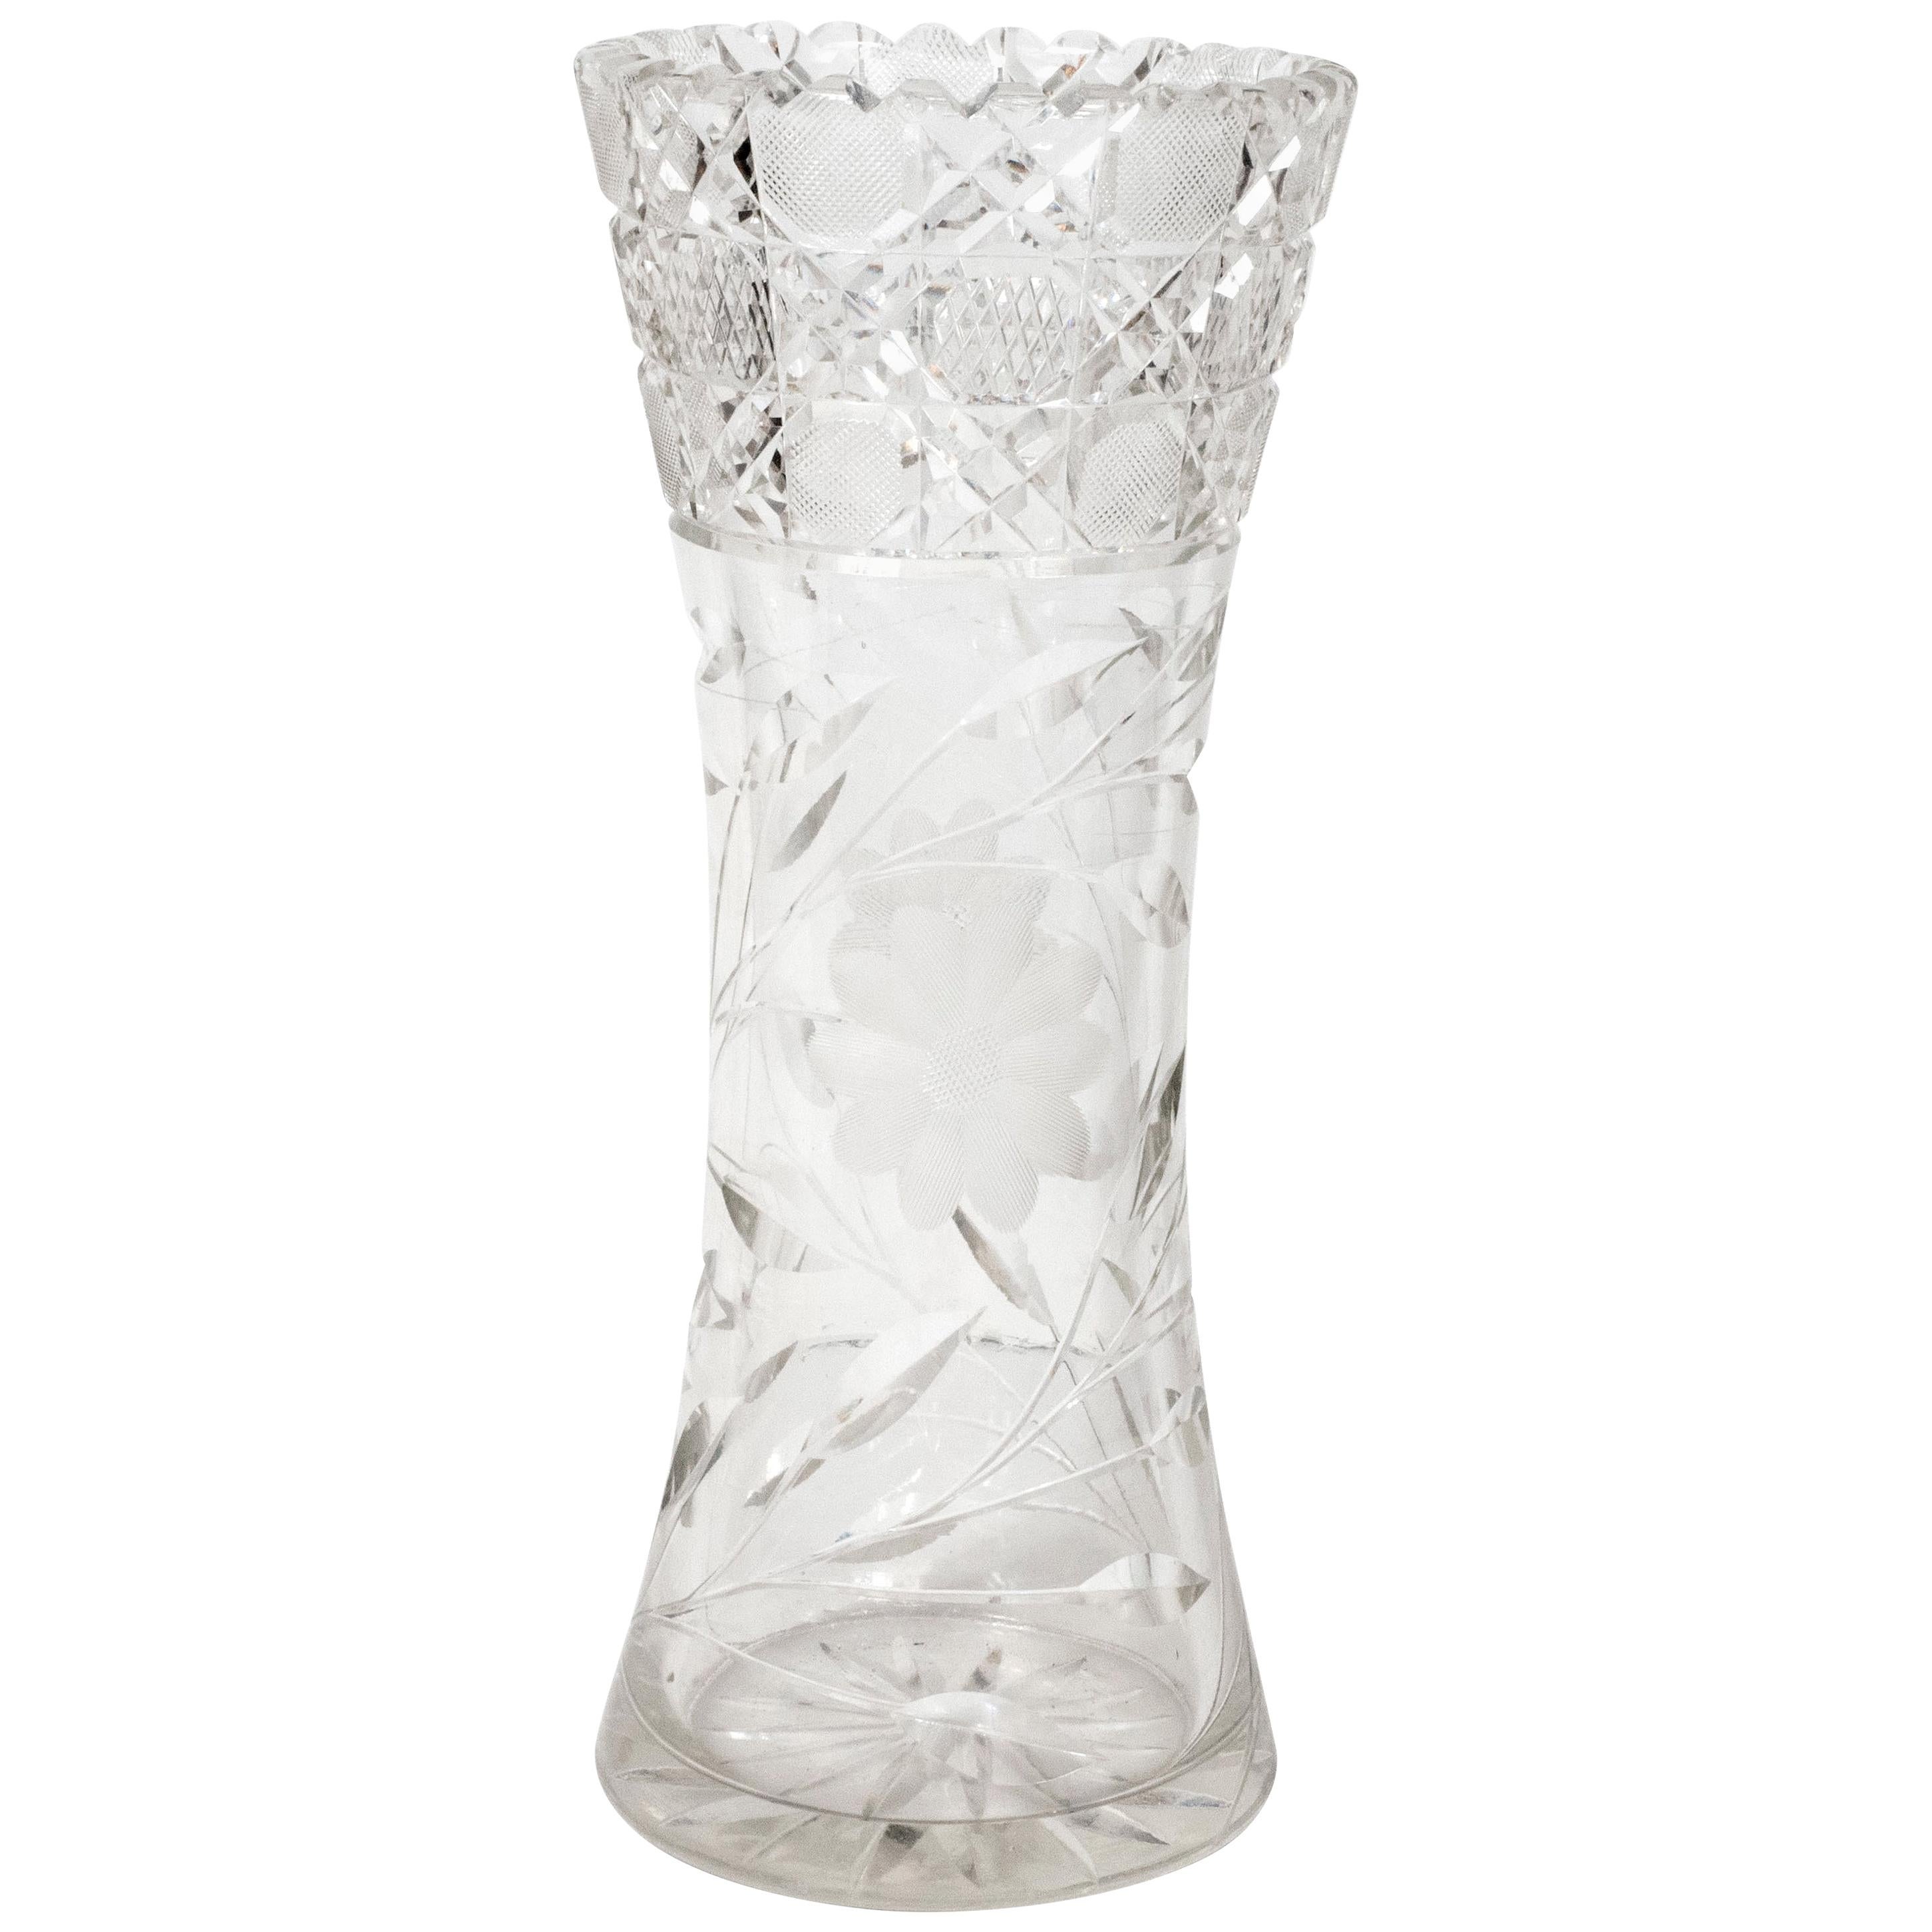 American Art Deco Brilliant Cut Glass Vase with Etched Floral Designs